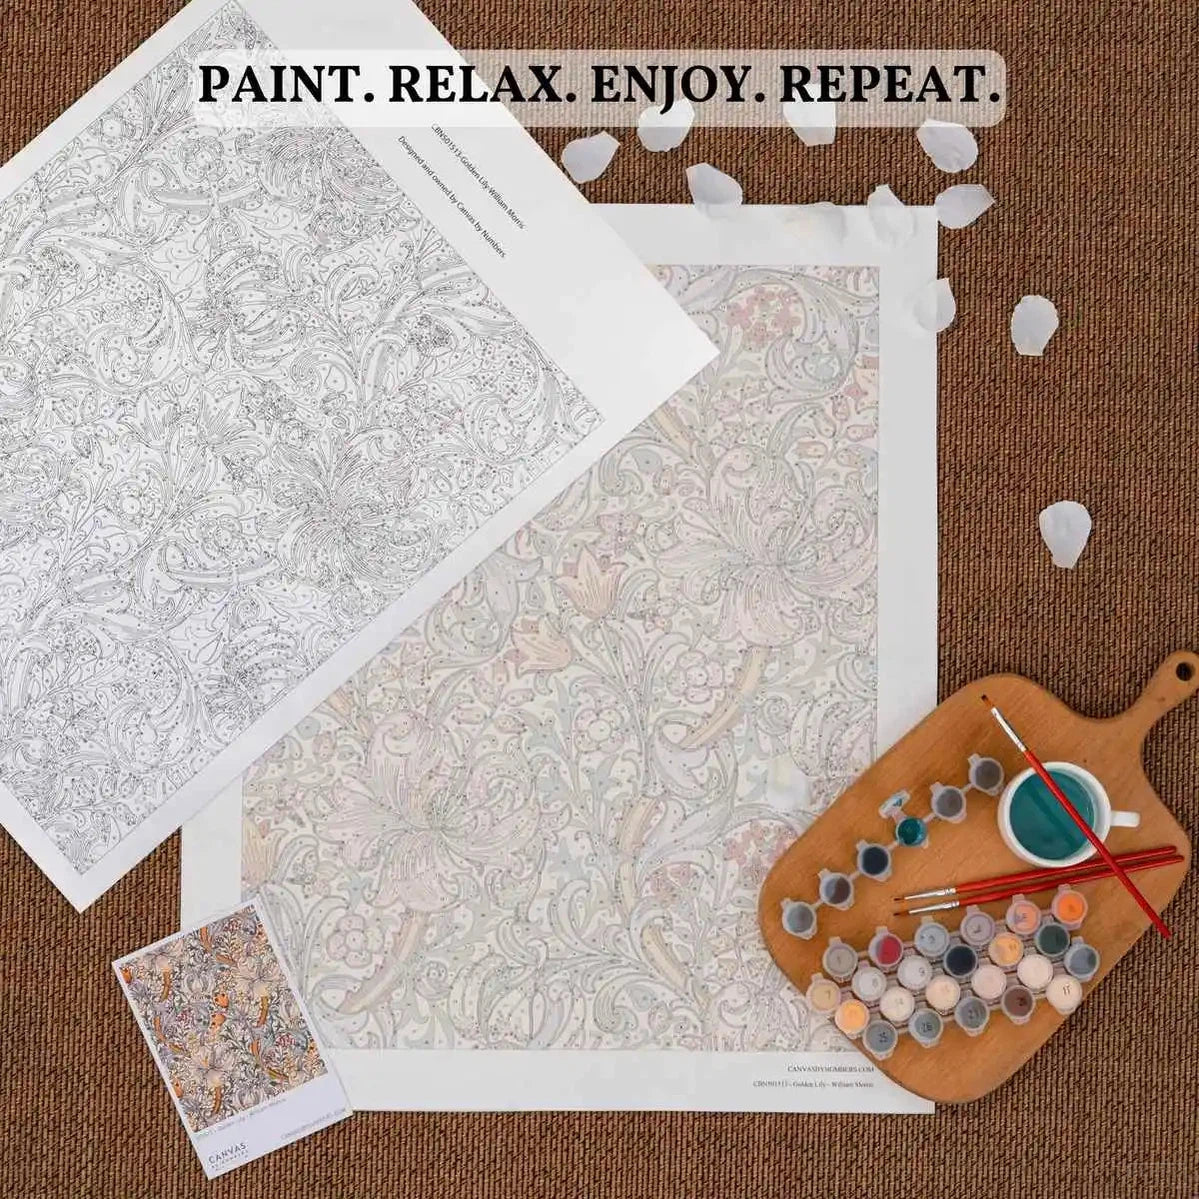 Paint Your Pet by Numbers Featuring Custom Paint by Numbers Kit